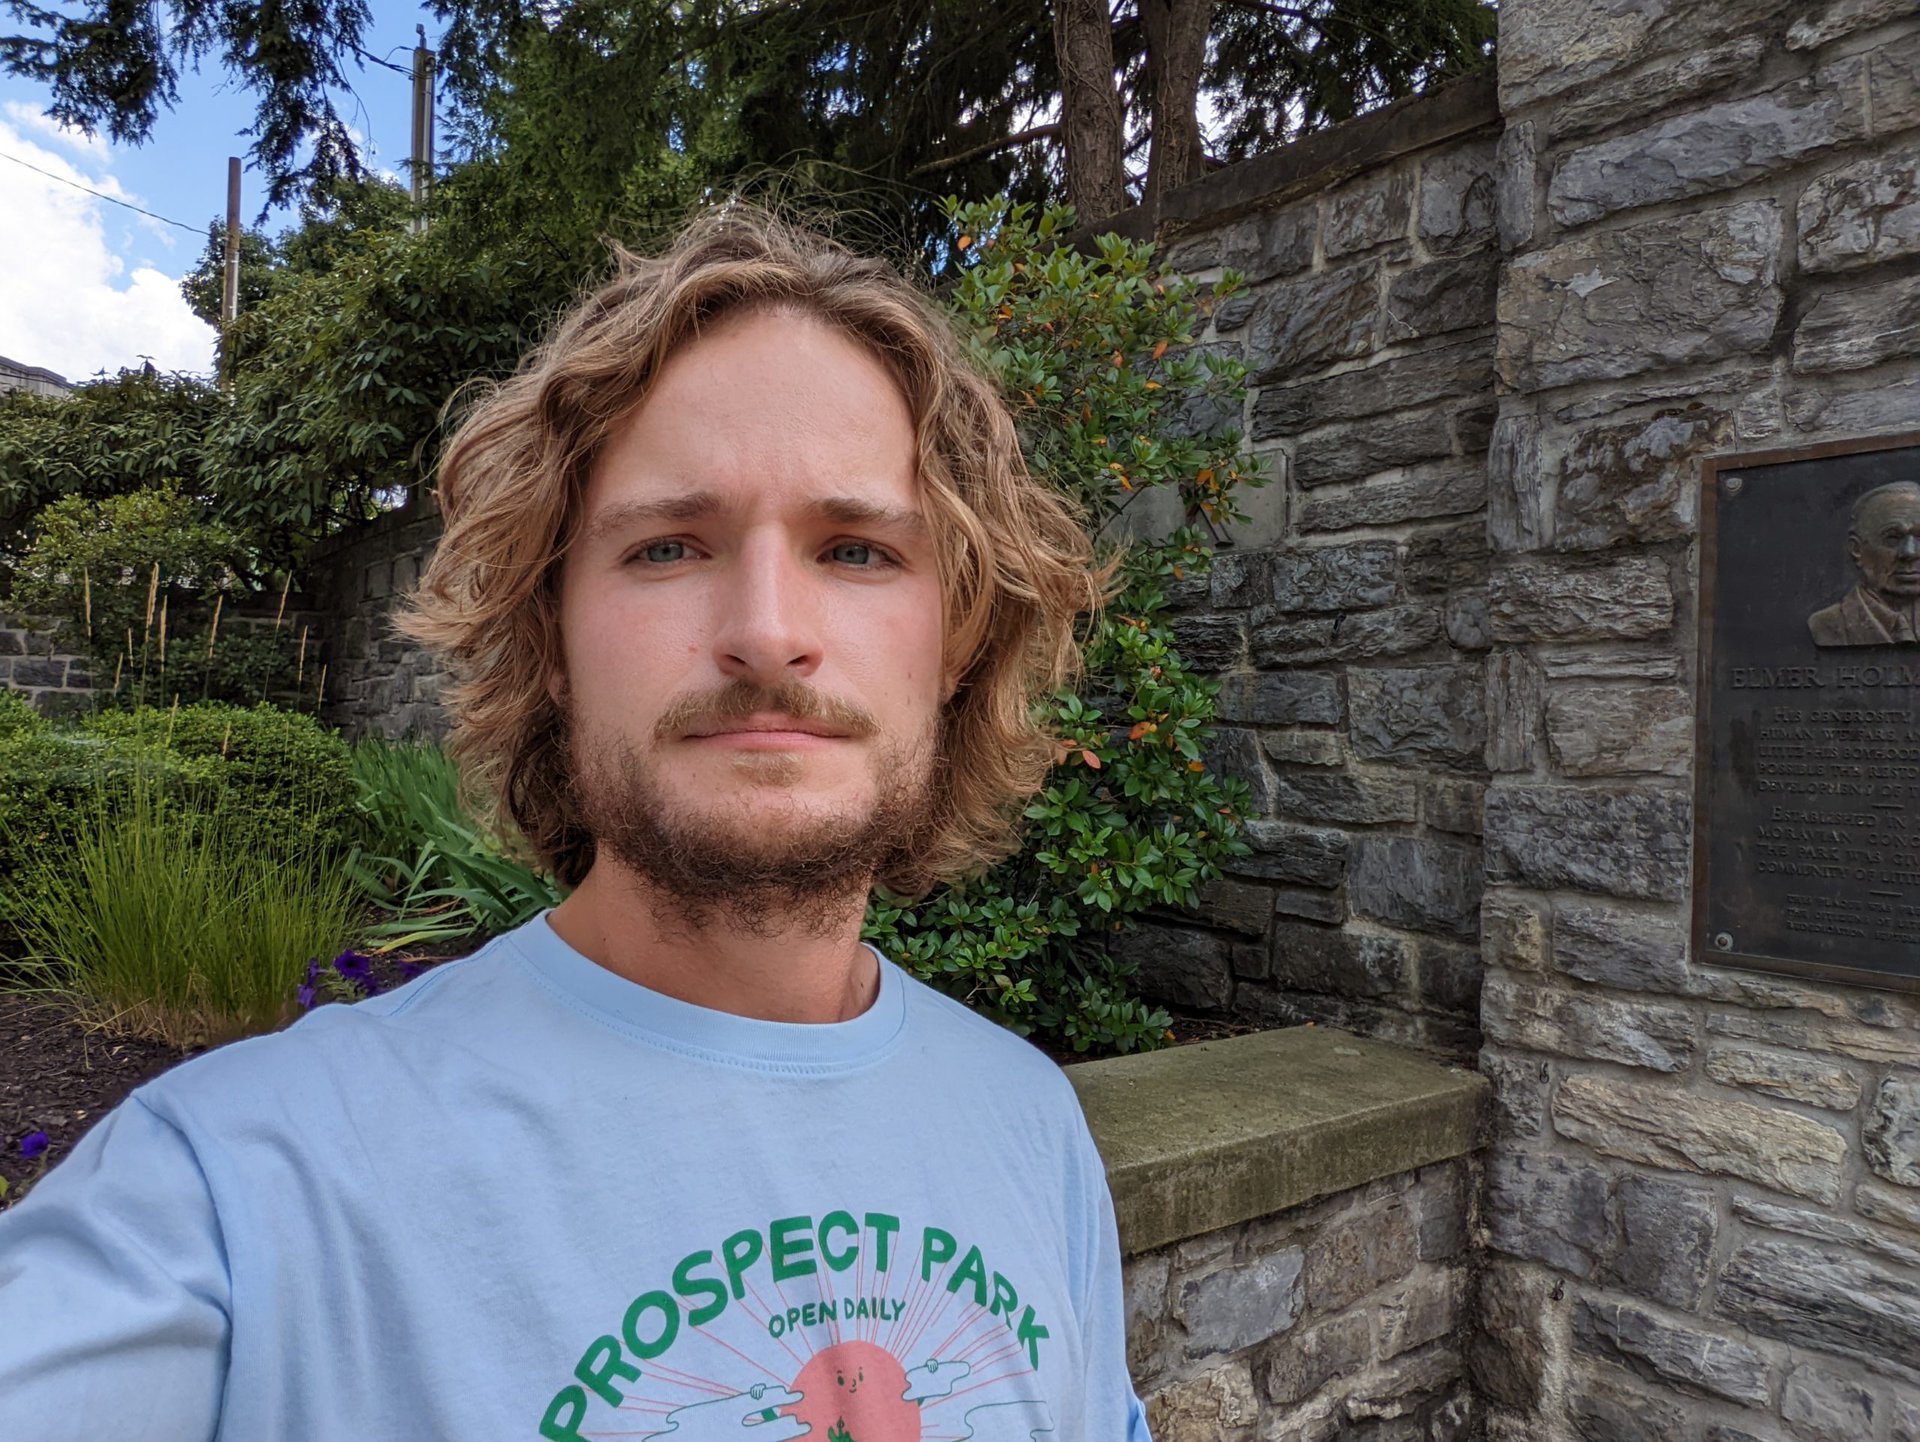 Pixel 6a standard selfie of a man with dirty blonde curly hair in a grey logo T-shirt standing outside with a stone wall visible behind him.